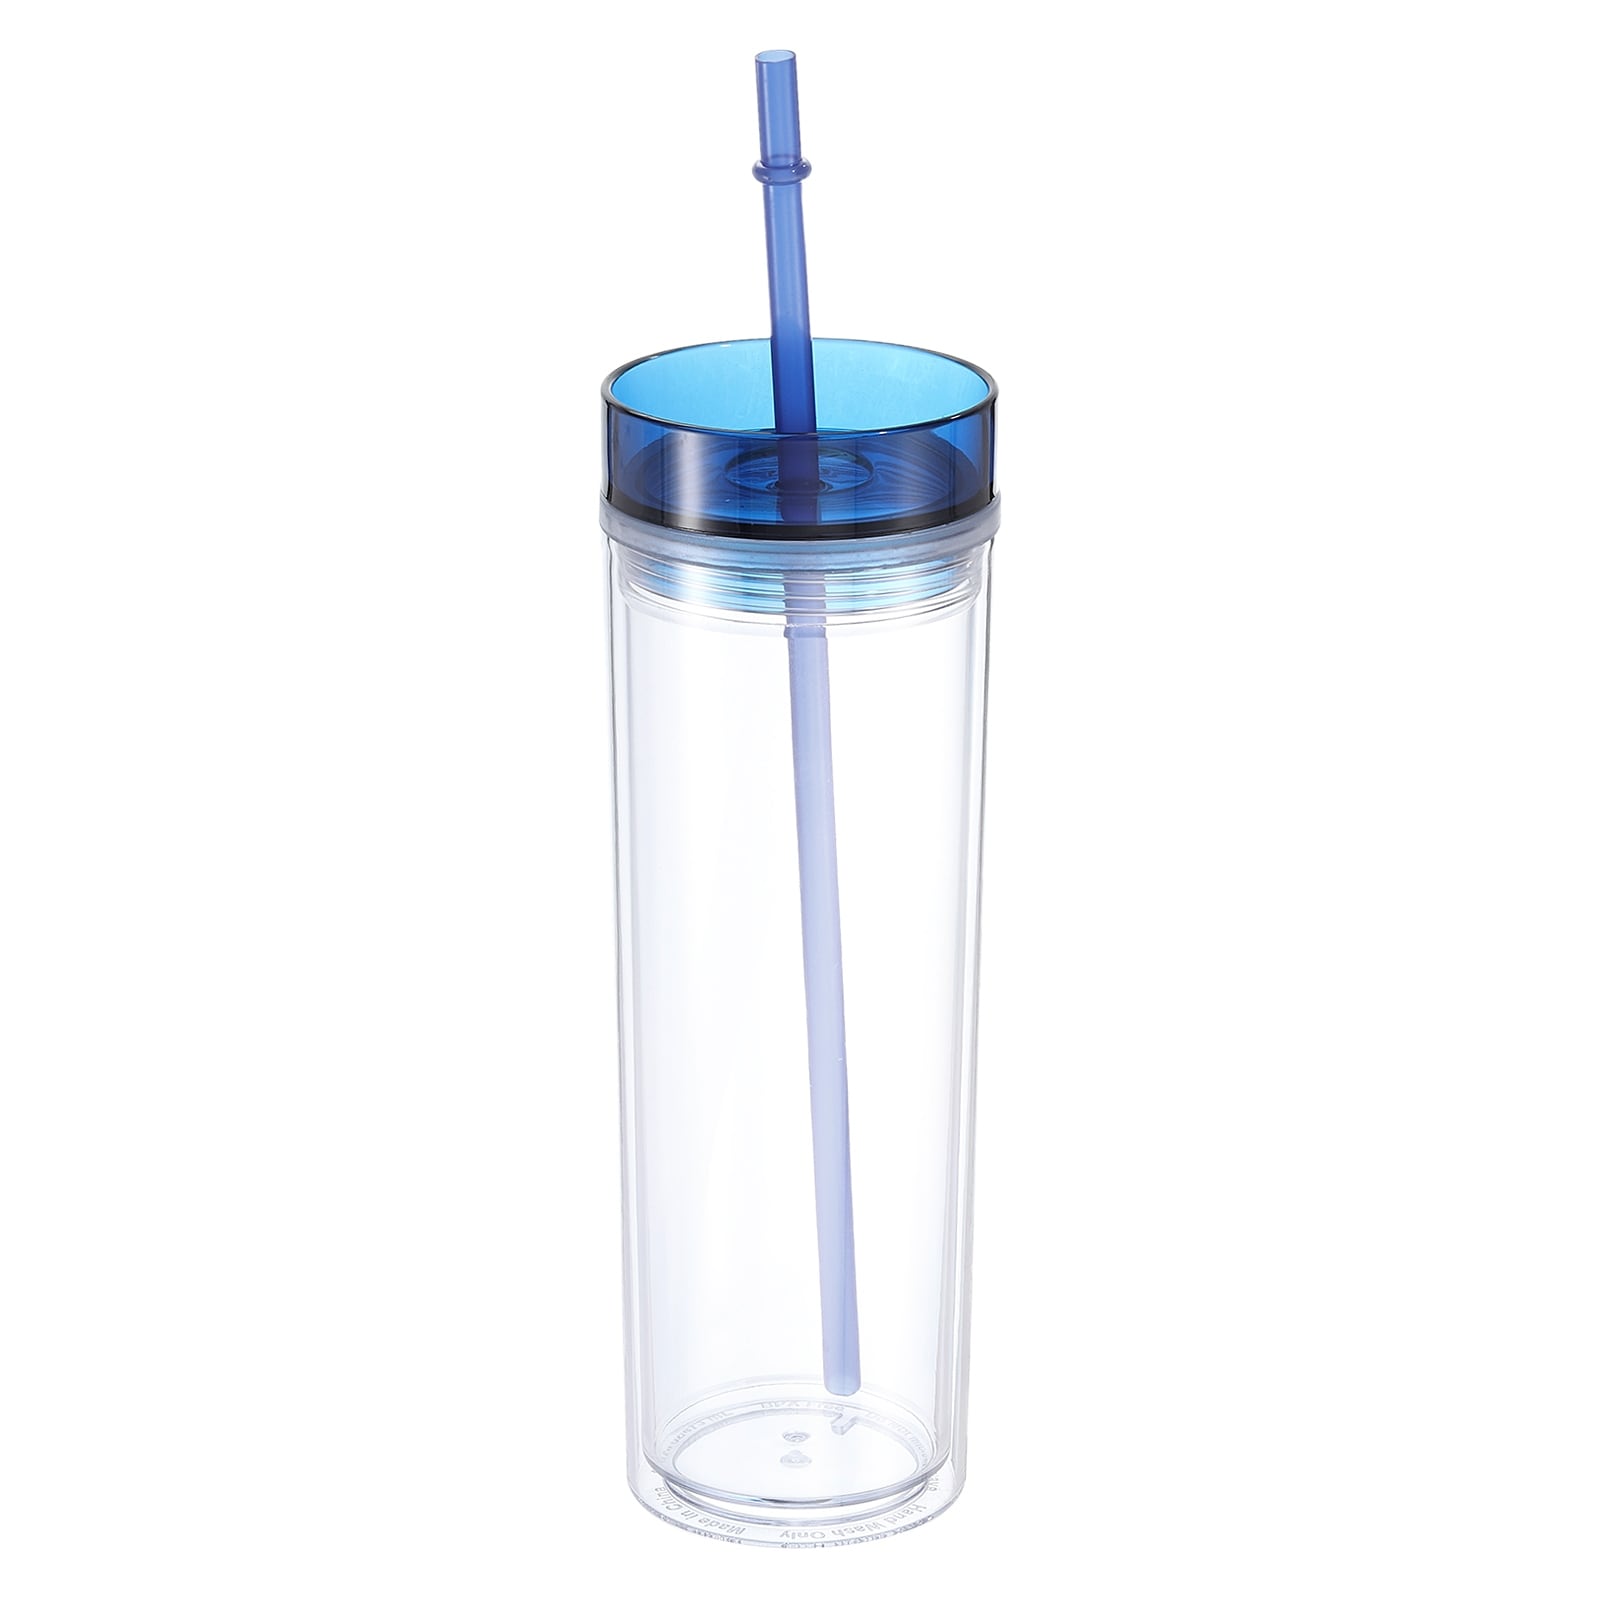 https://ak1.ostkcdn.com/images/products/is/images/direct/684f5fba91a1d6f391b42026a96ca5a637e8decc/Skinny-Acrylic-Tumbler-with-Lid-and-Straw%2C-16-Oz-Double-Wall-Cups.jpg